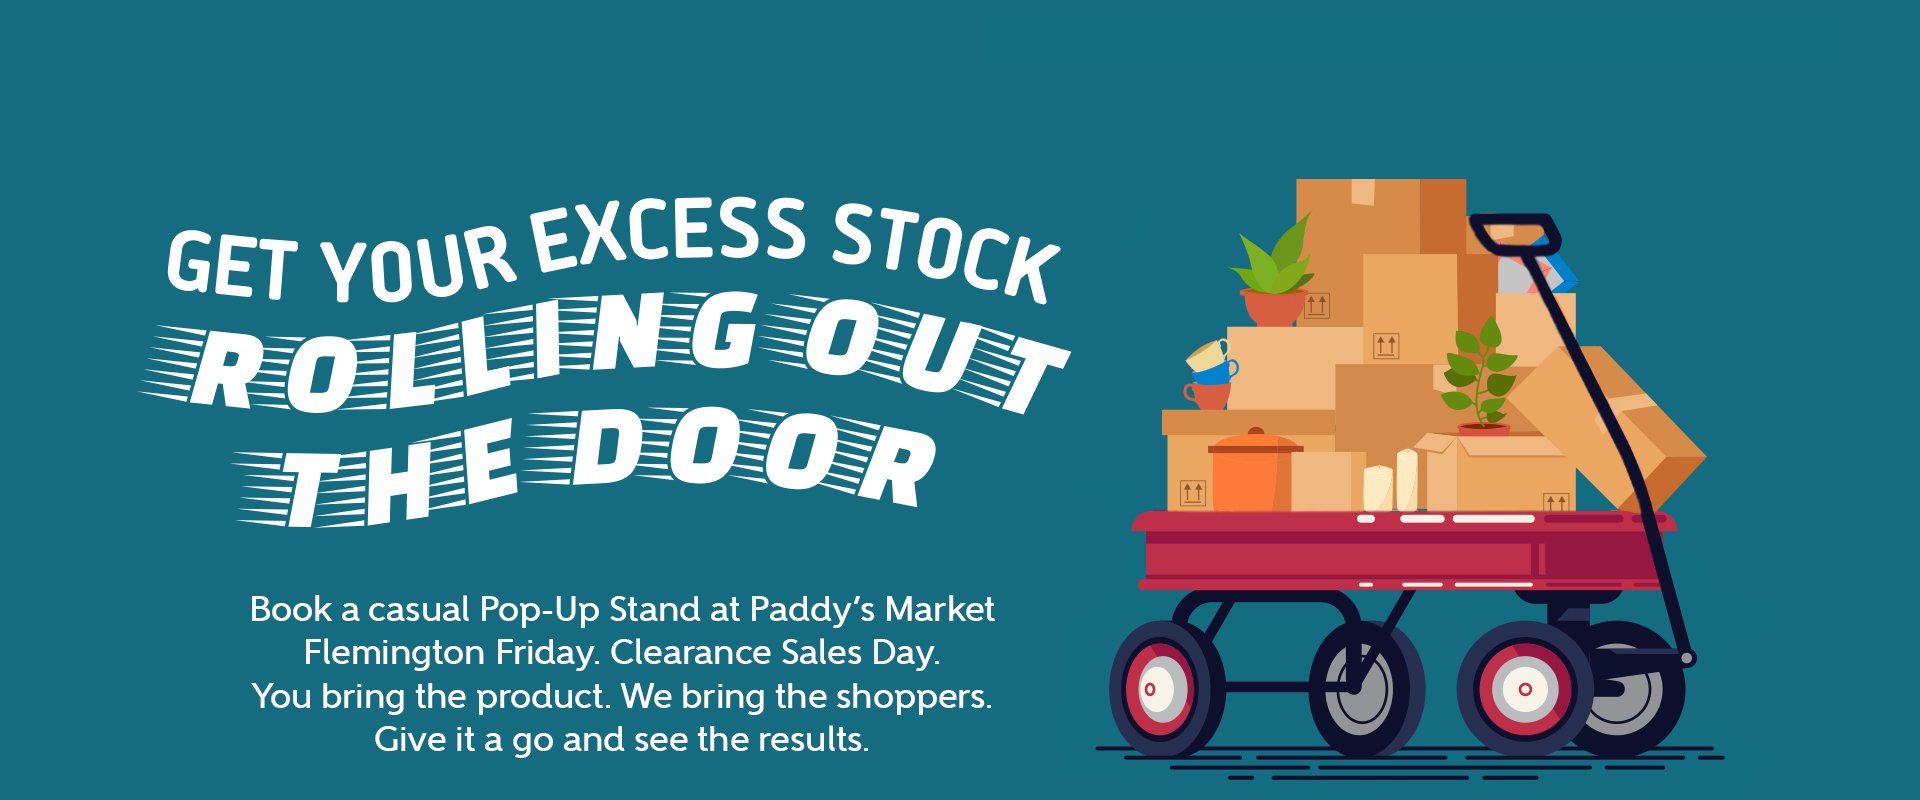 Clear Your Stock at Paddy's Markets Flemington Friday